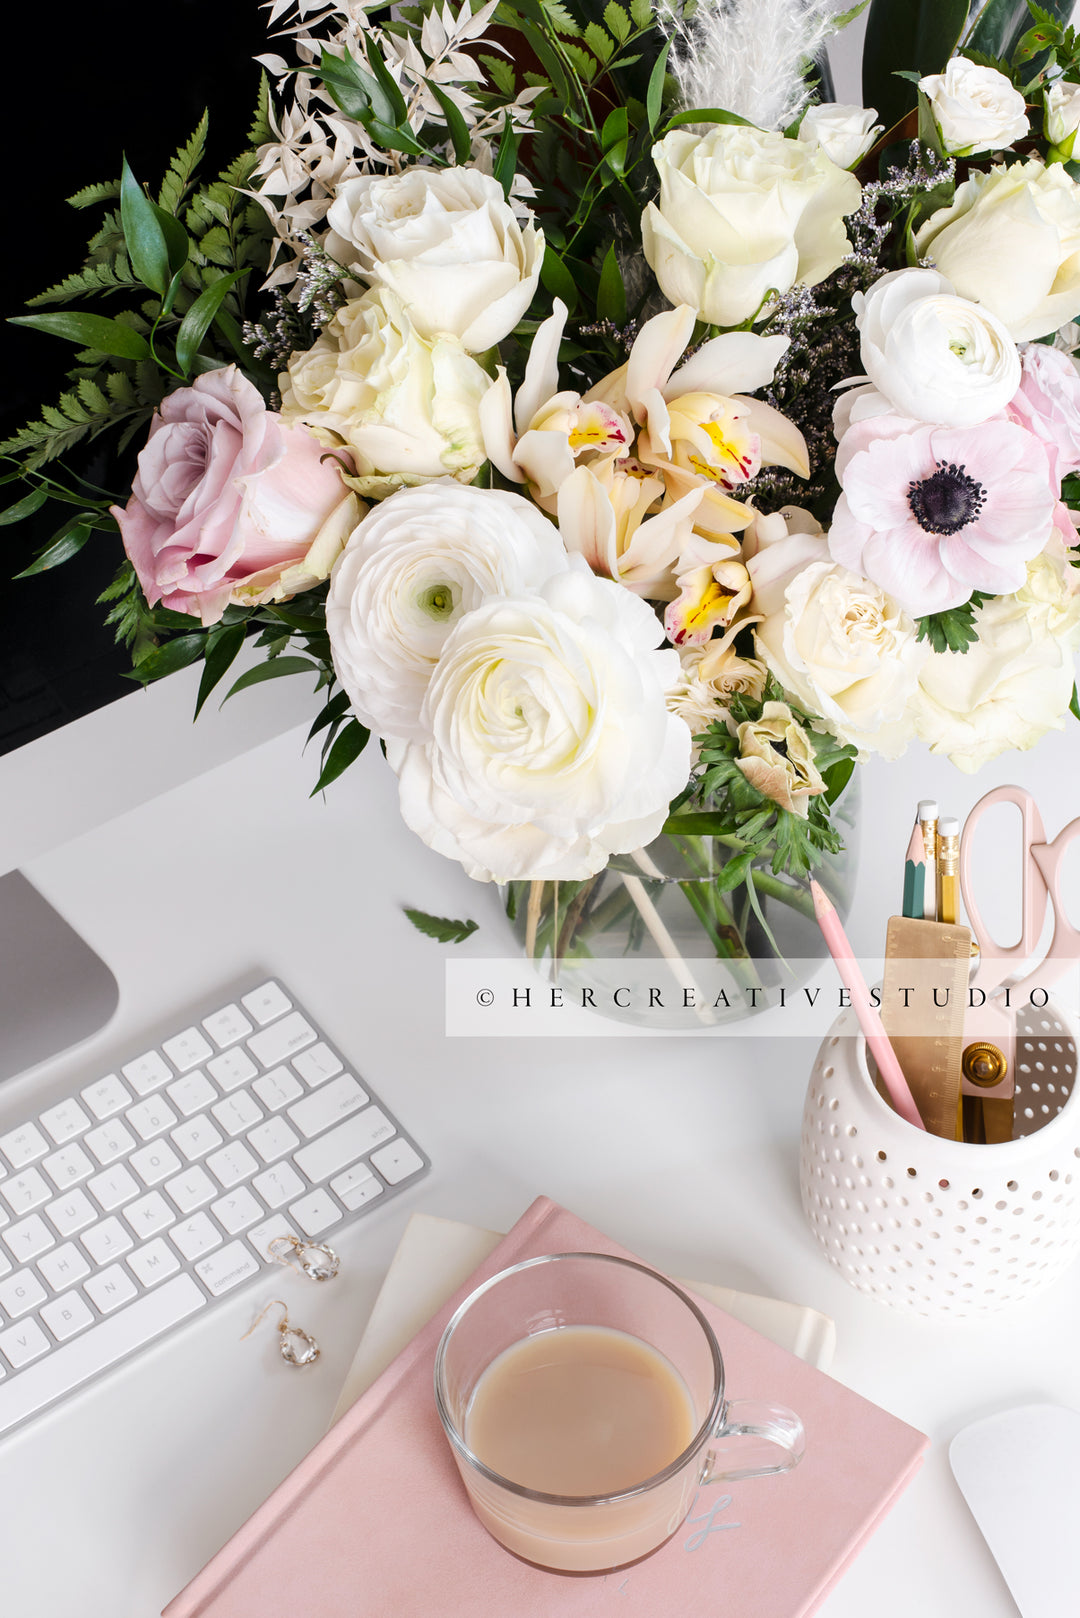 Coffee, Flowers & Computer on Workspace, Styled Stock Image